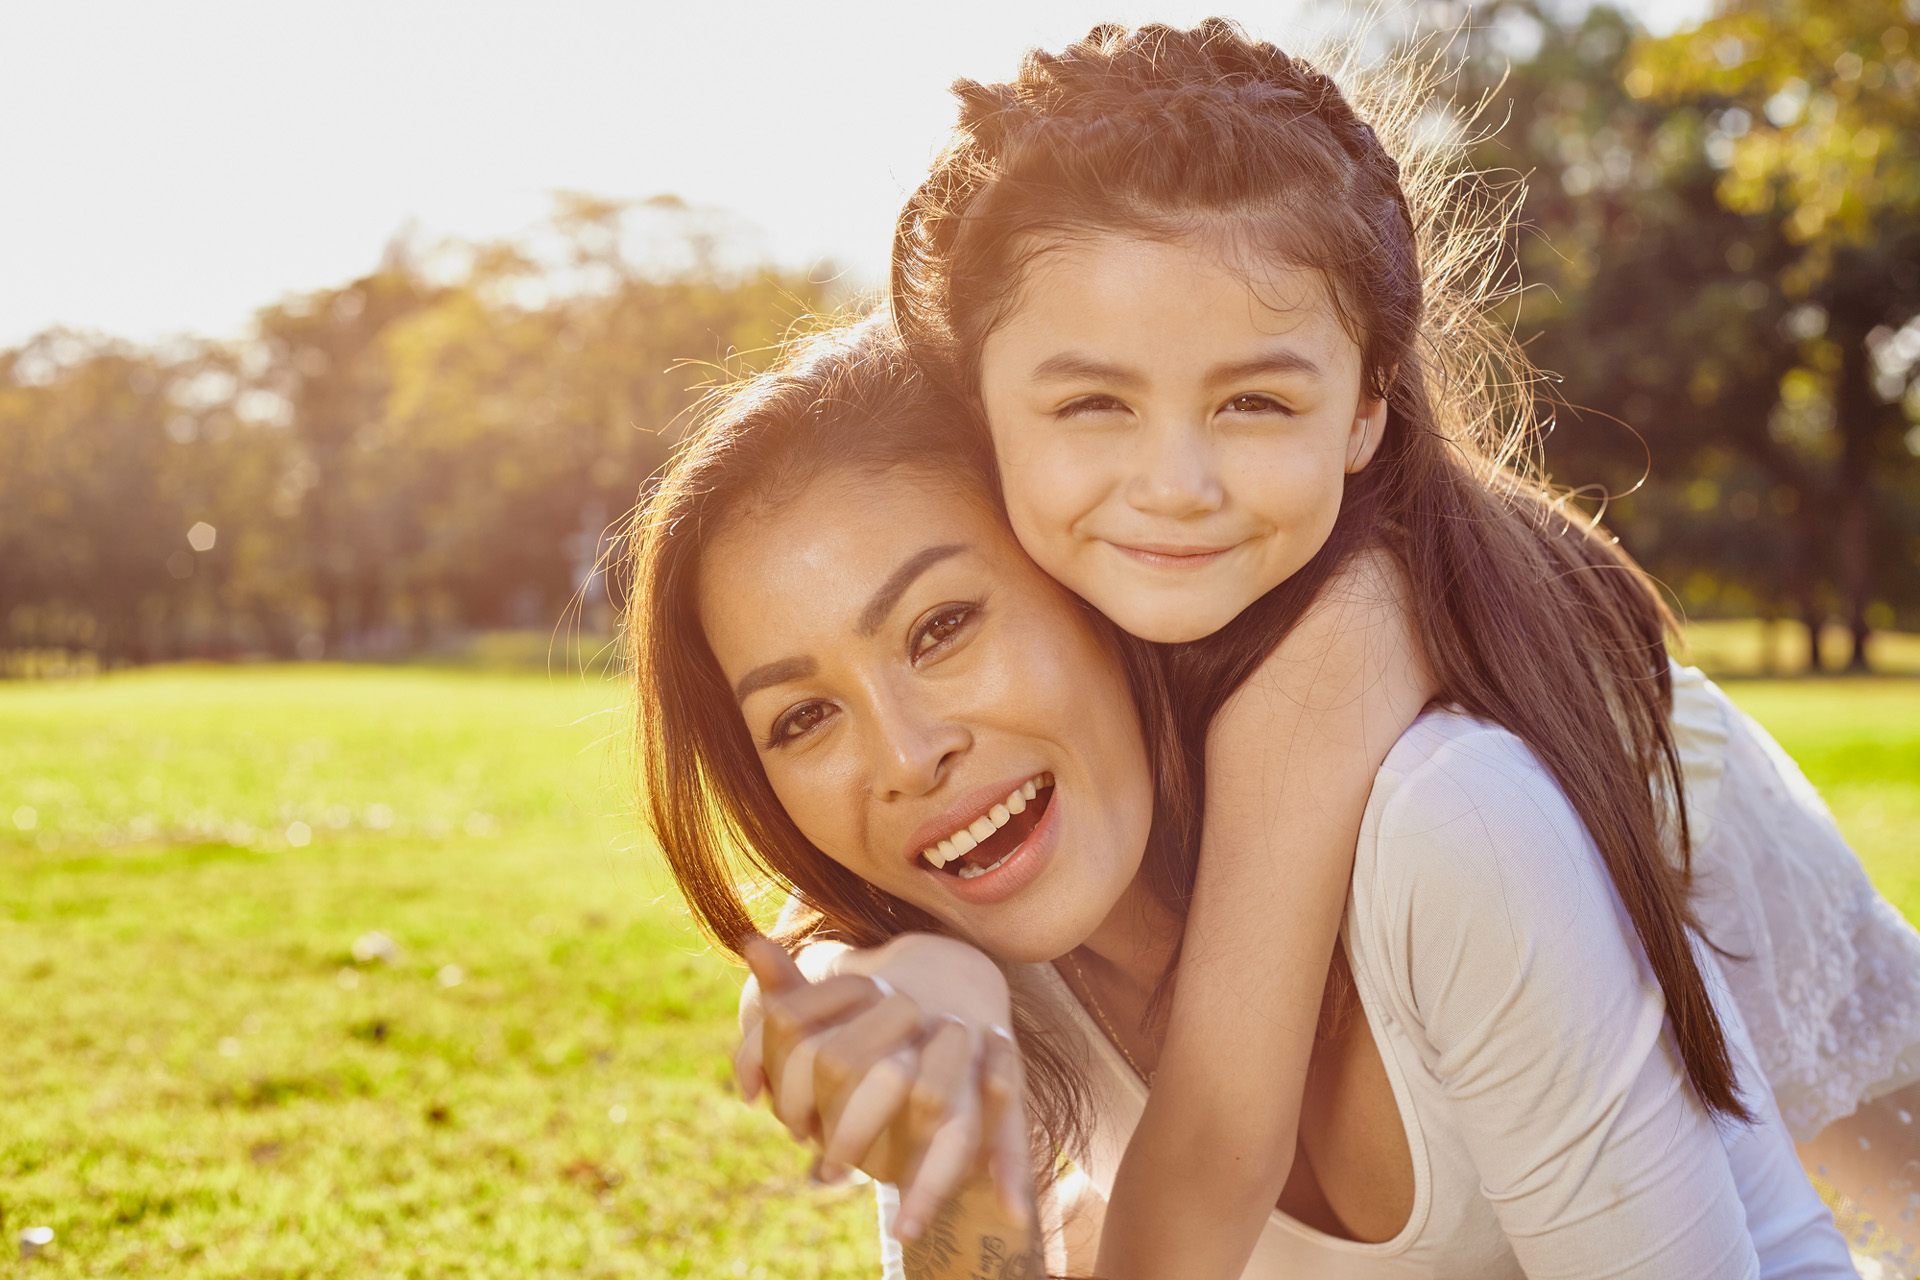 Natural light is crucial for healthy eye development, so make sure your child spends enough time outdoors. Remember to protect the skin and eyes against harmful UV rays!